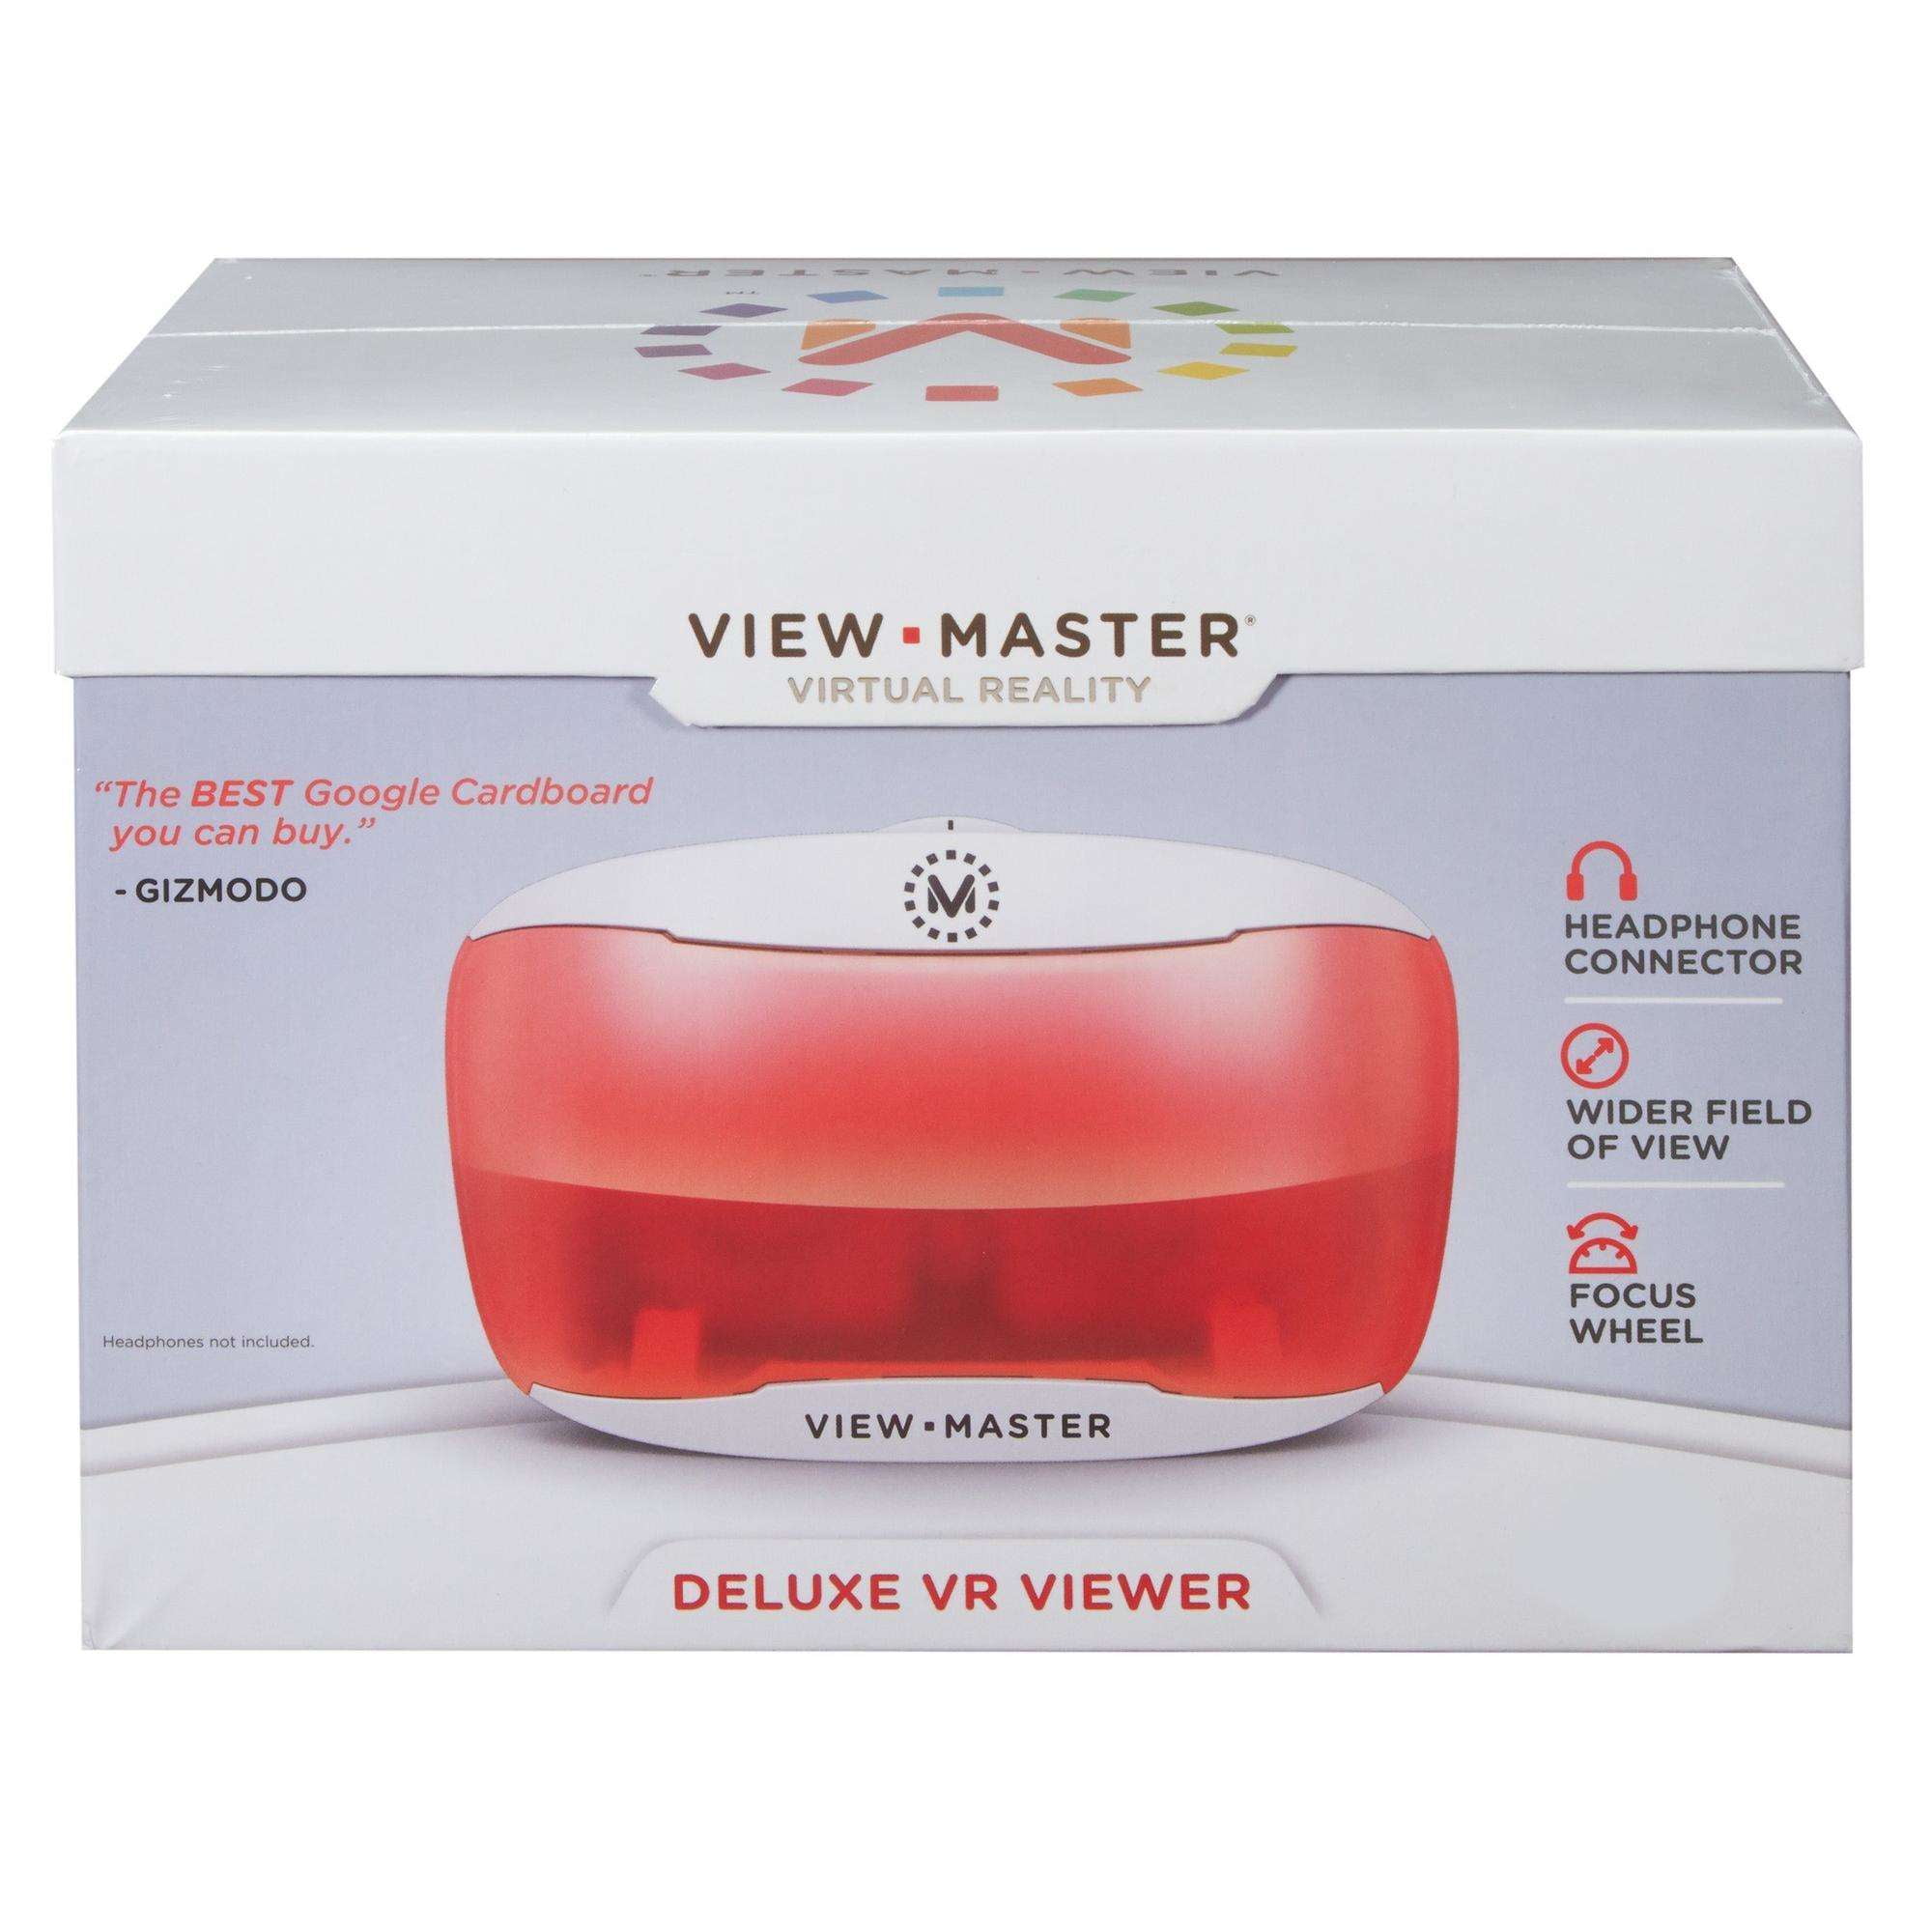 View-Master Deluxe Vr Viewer